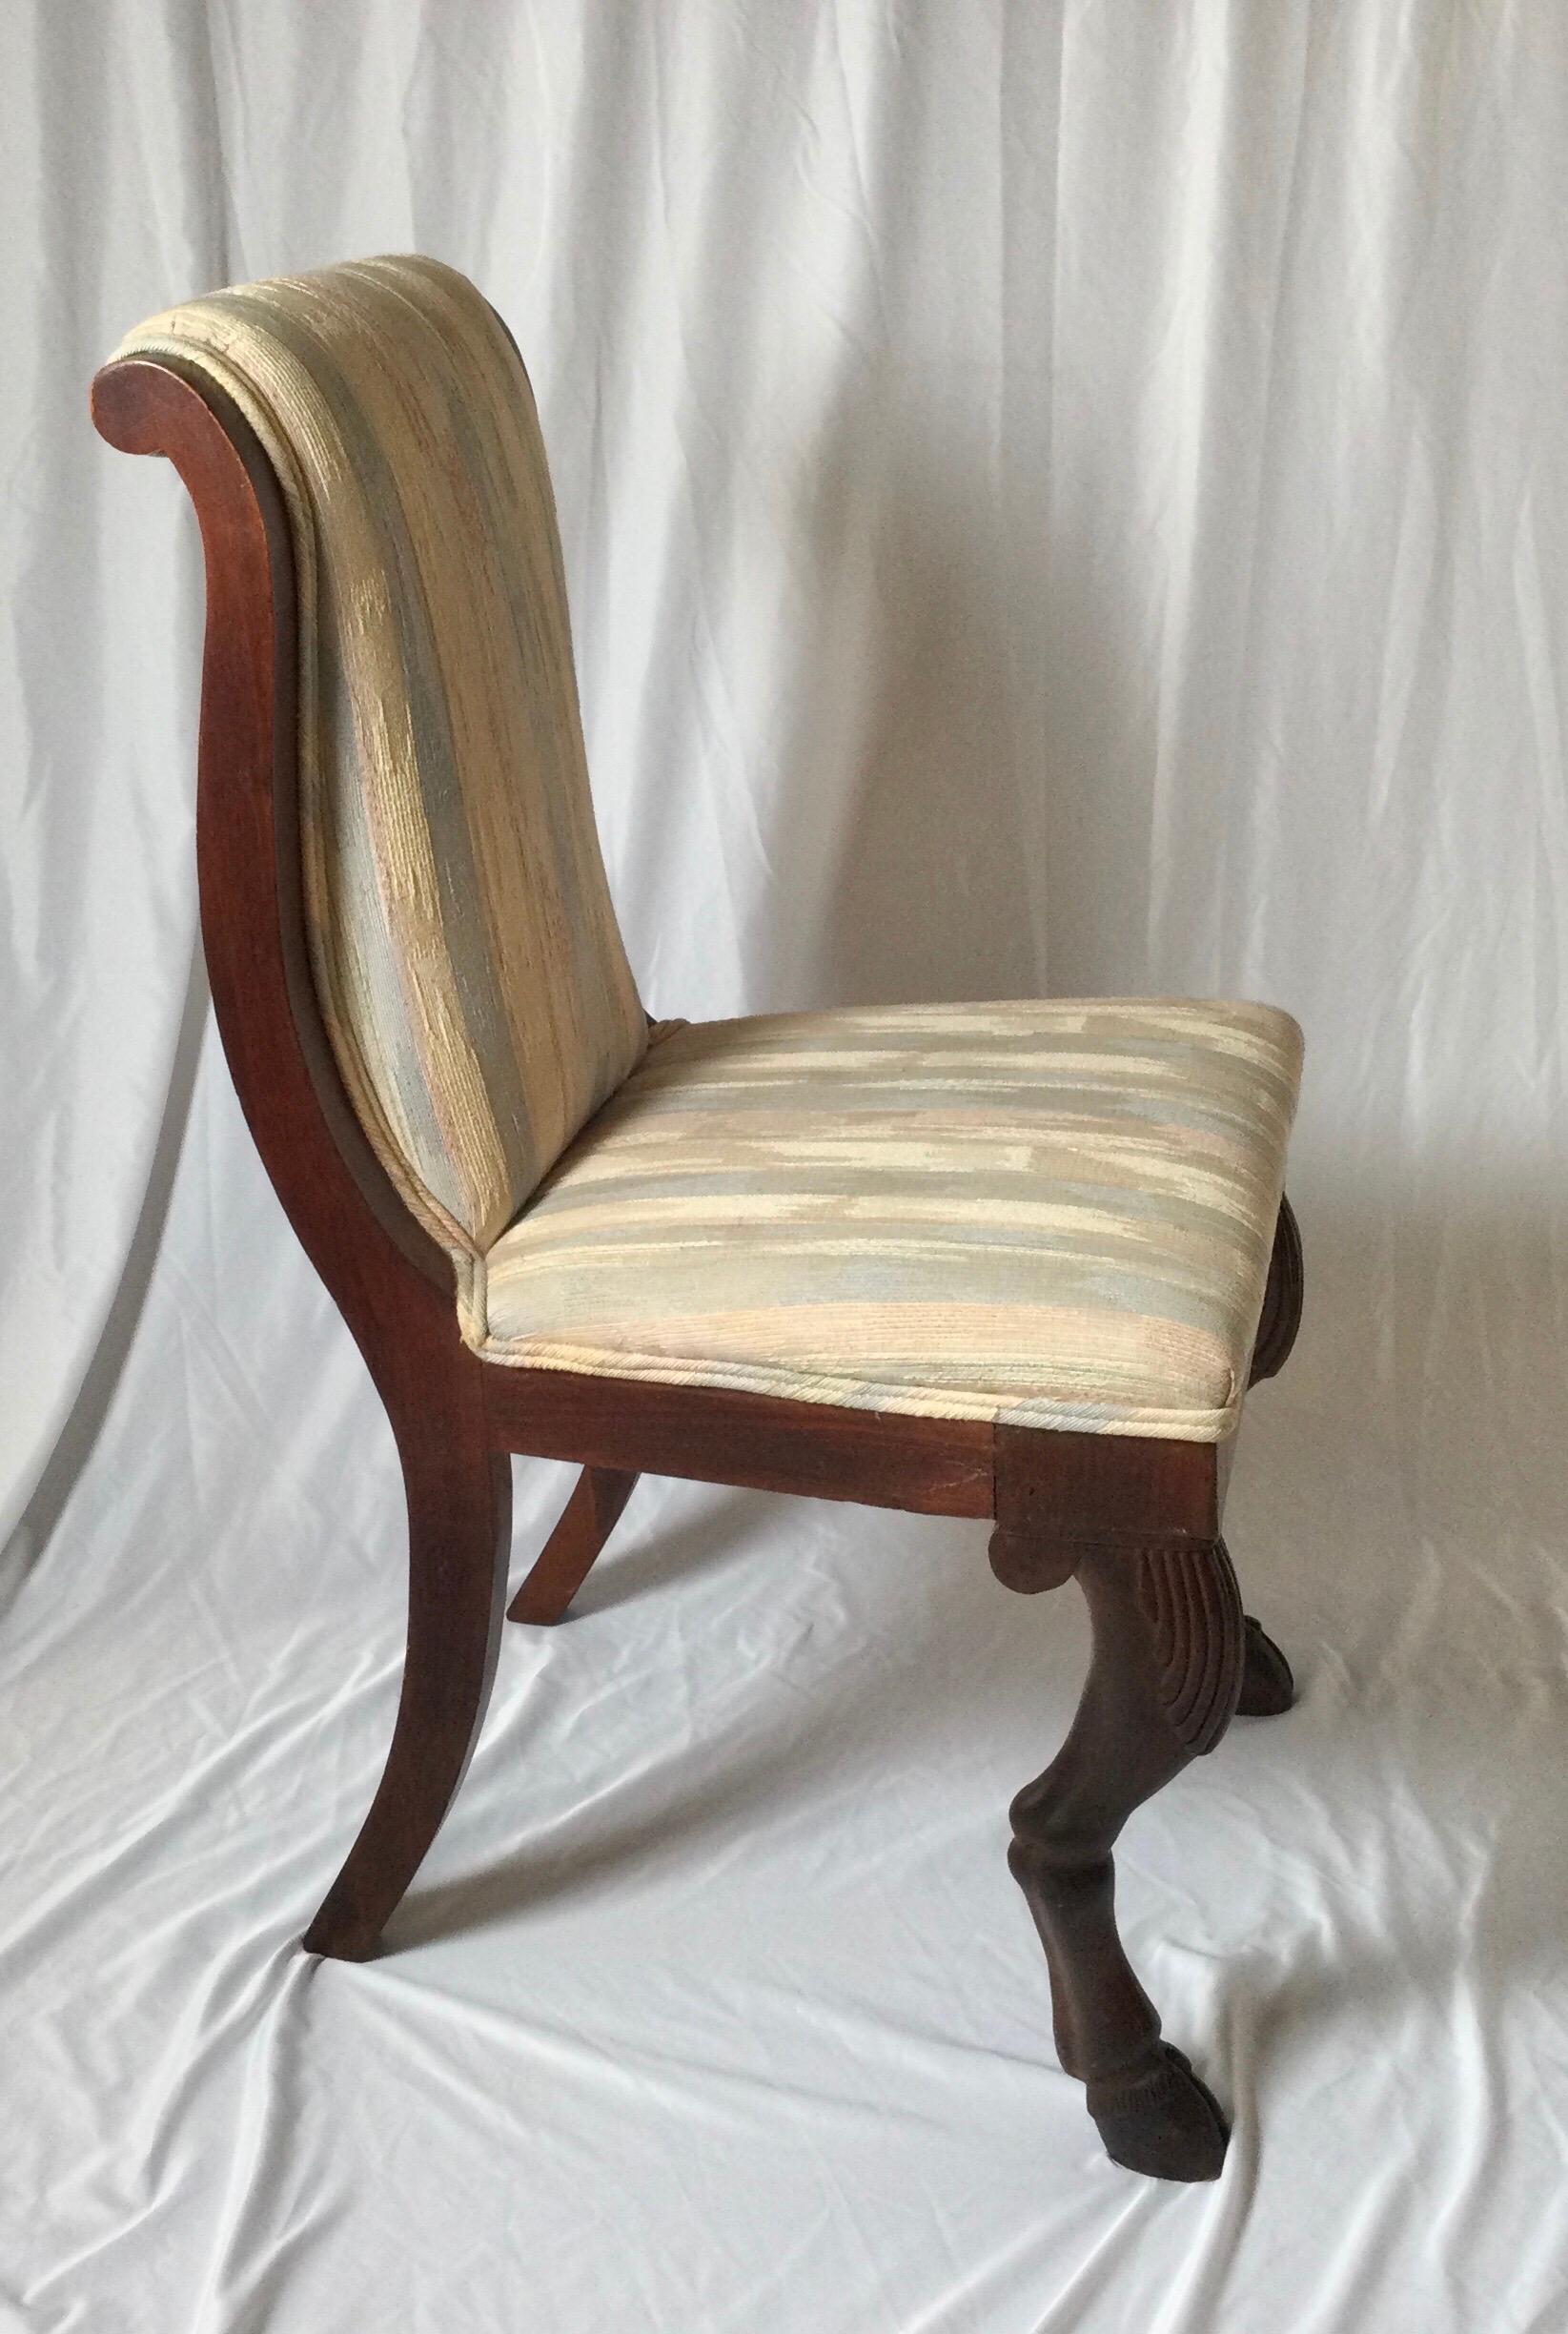 English Regency Era Side Chair with Goat Hoof Front Legs For Sale